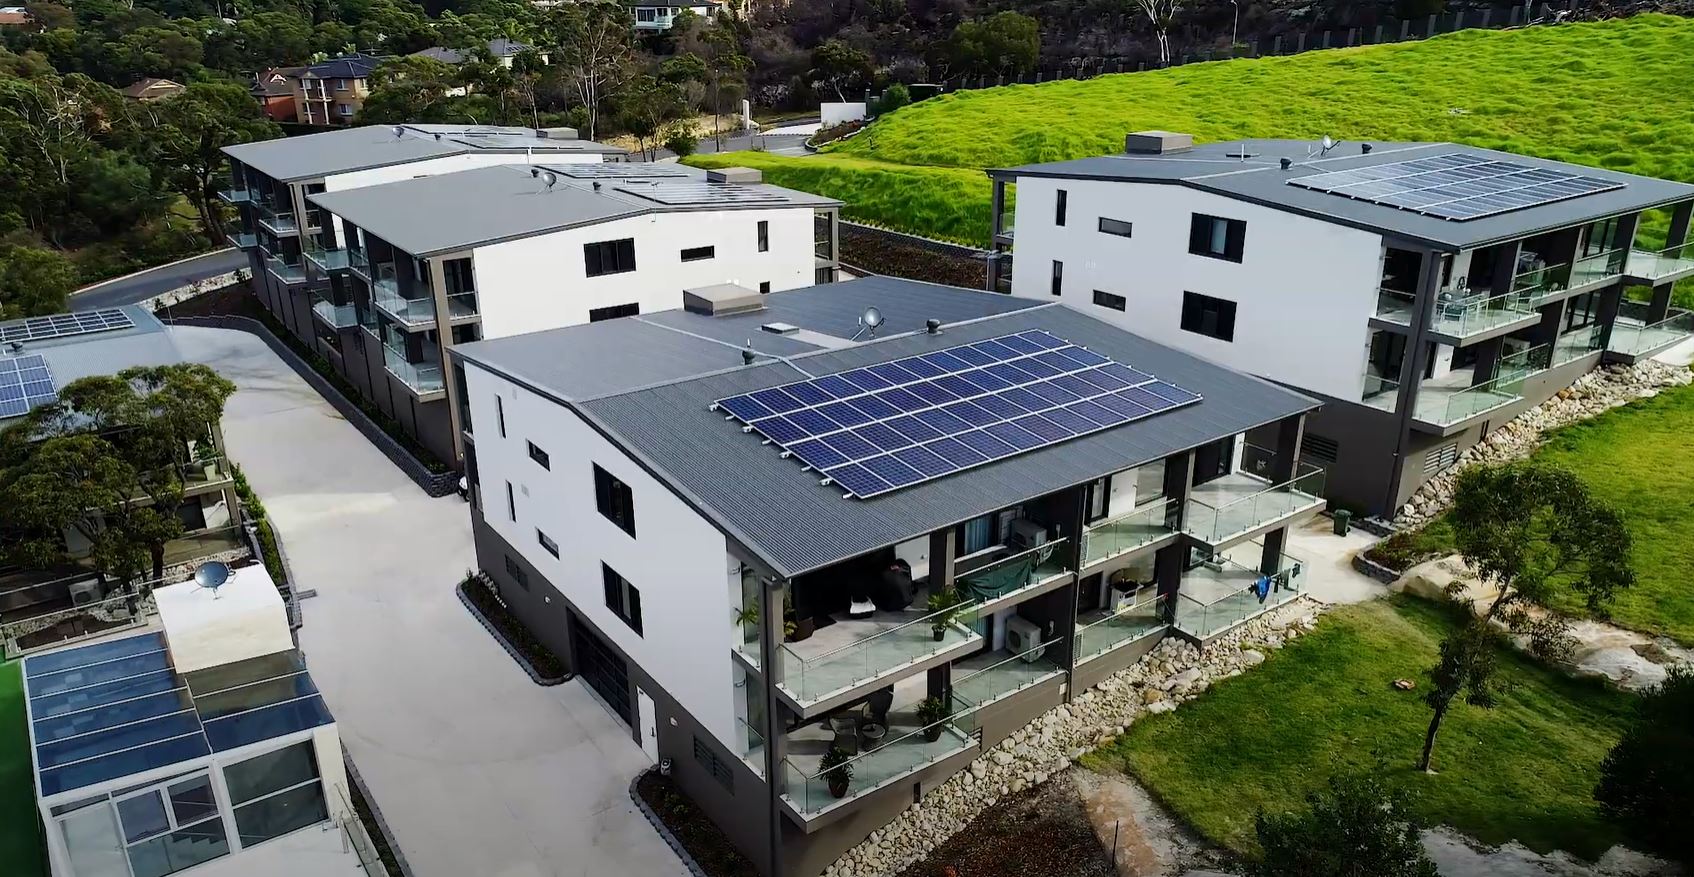 Energy Commission Scaled Back Plans To Charge Solar Households - featured image